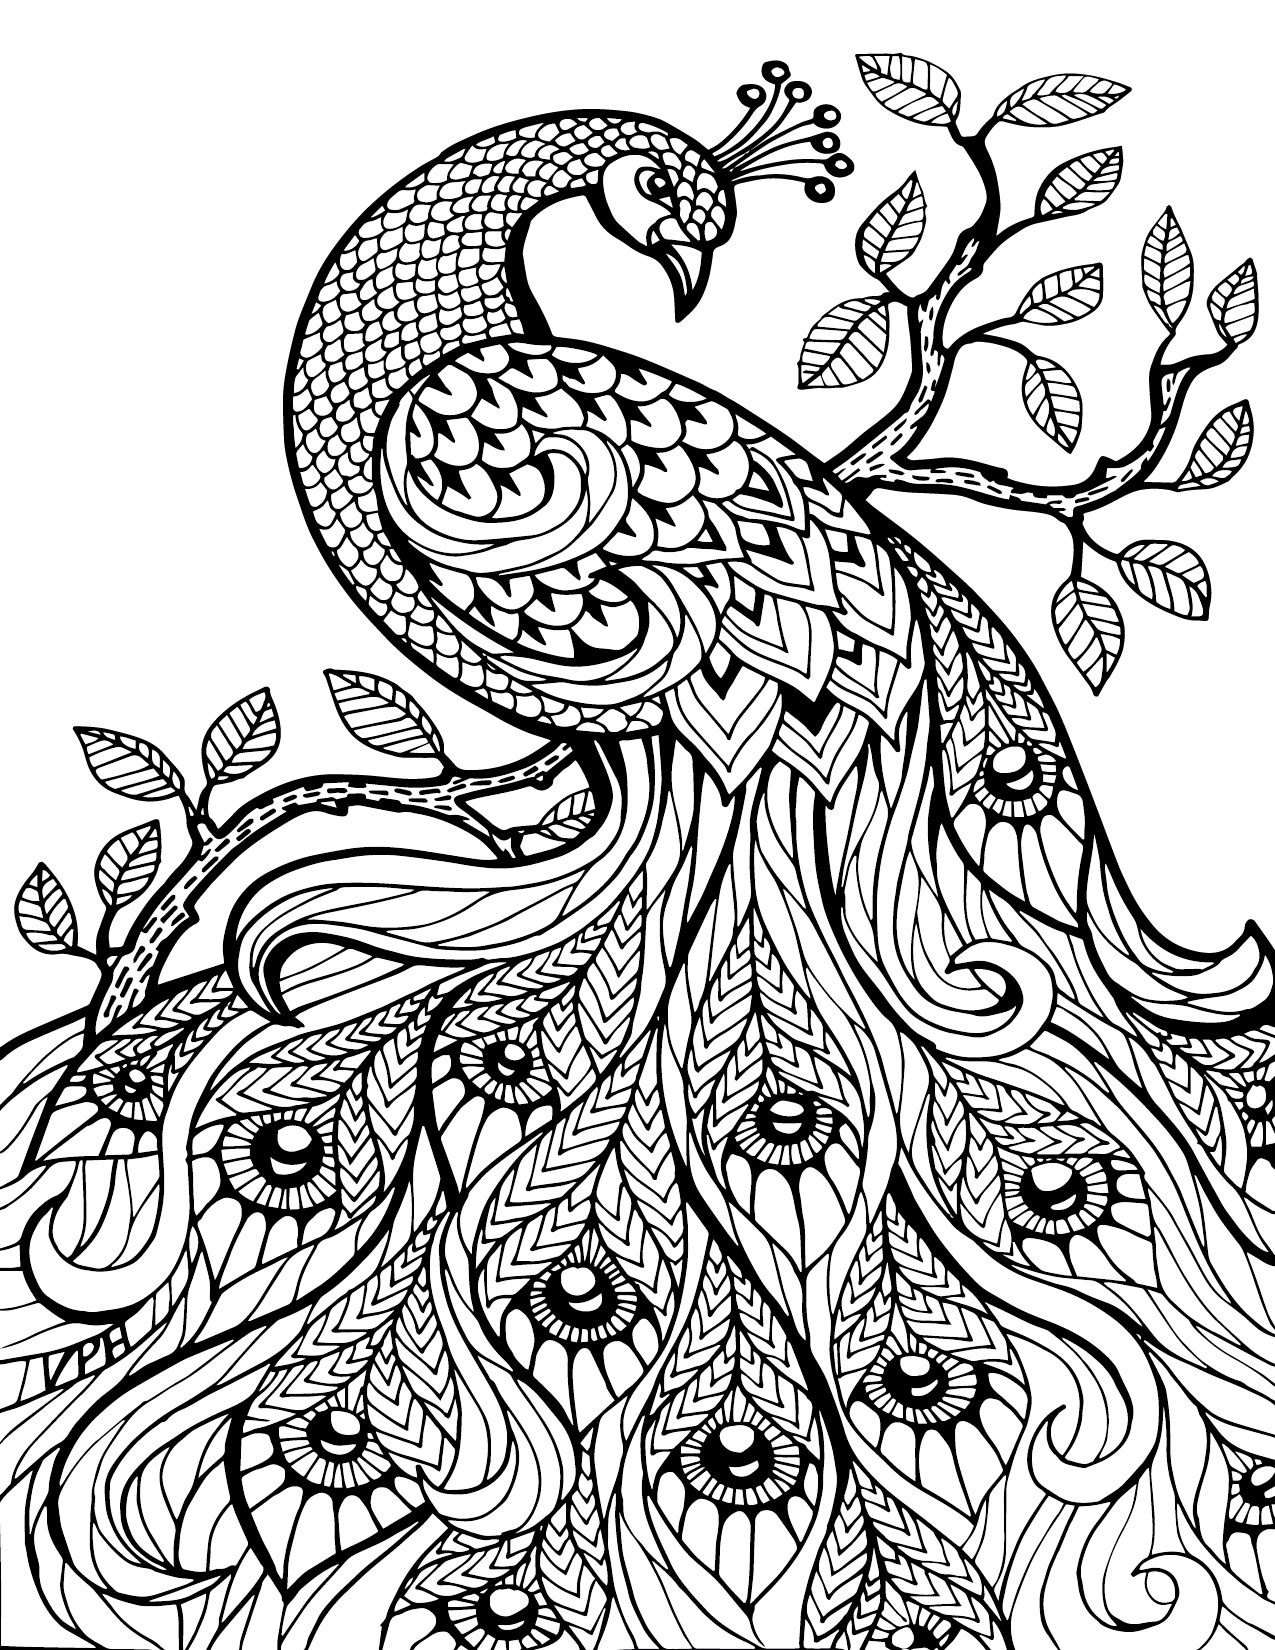 Free Printable Coloring Pages For Adults Only Image 36 Art - Free Printable Coloring Pages For Adults Only